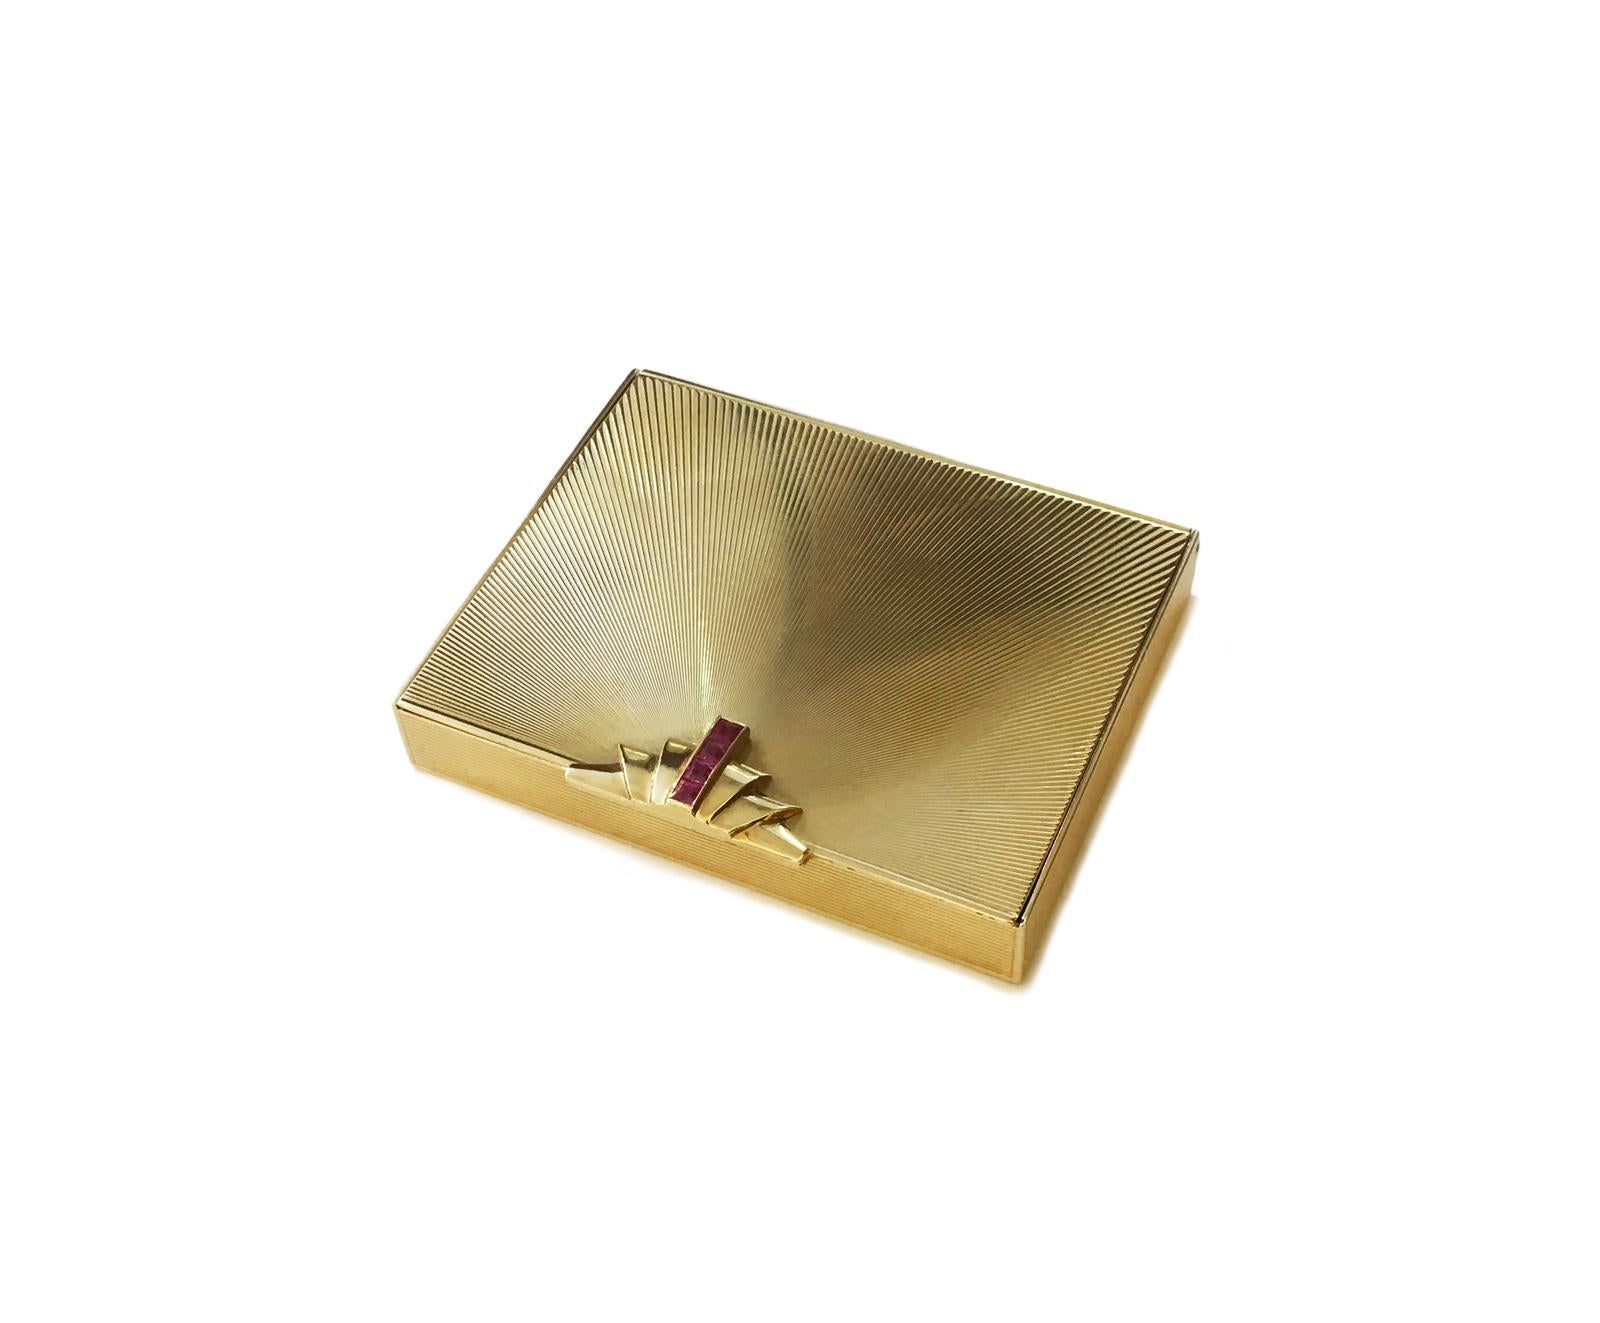 A stunning Retro compact from Tiffany & Co. The compact is made from 14kt solid yellow gold. The face of this compact has a simple design that holds four vibrant, square-cut rubies. The exterior has a carved texture which perfectly represents the